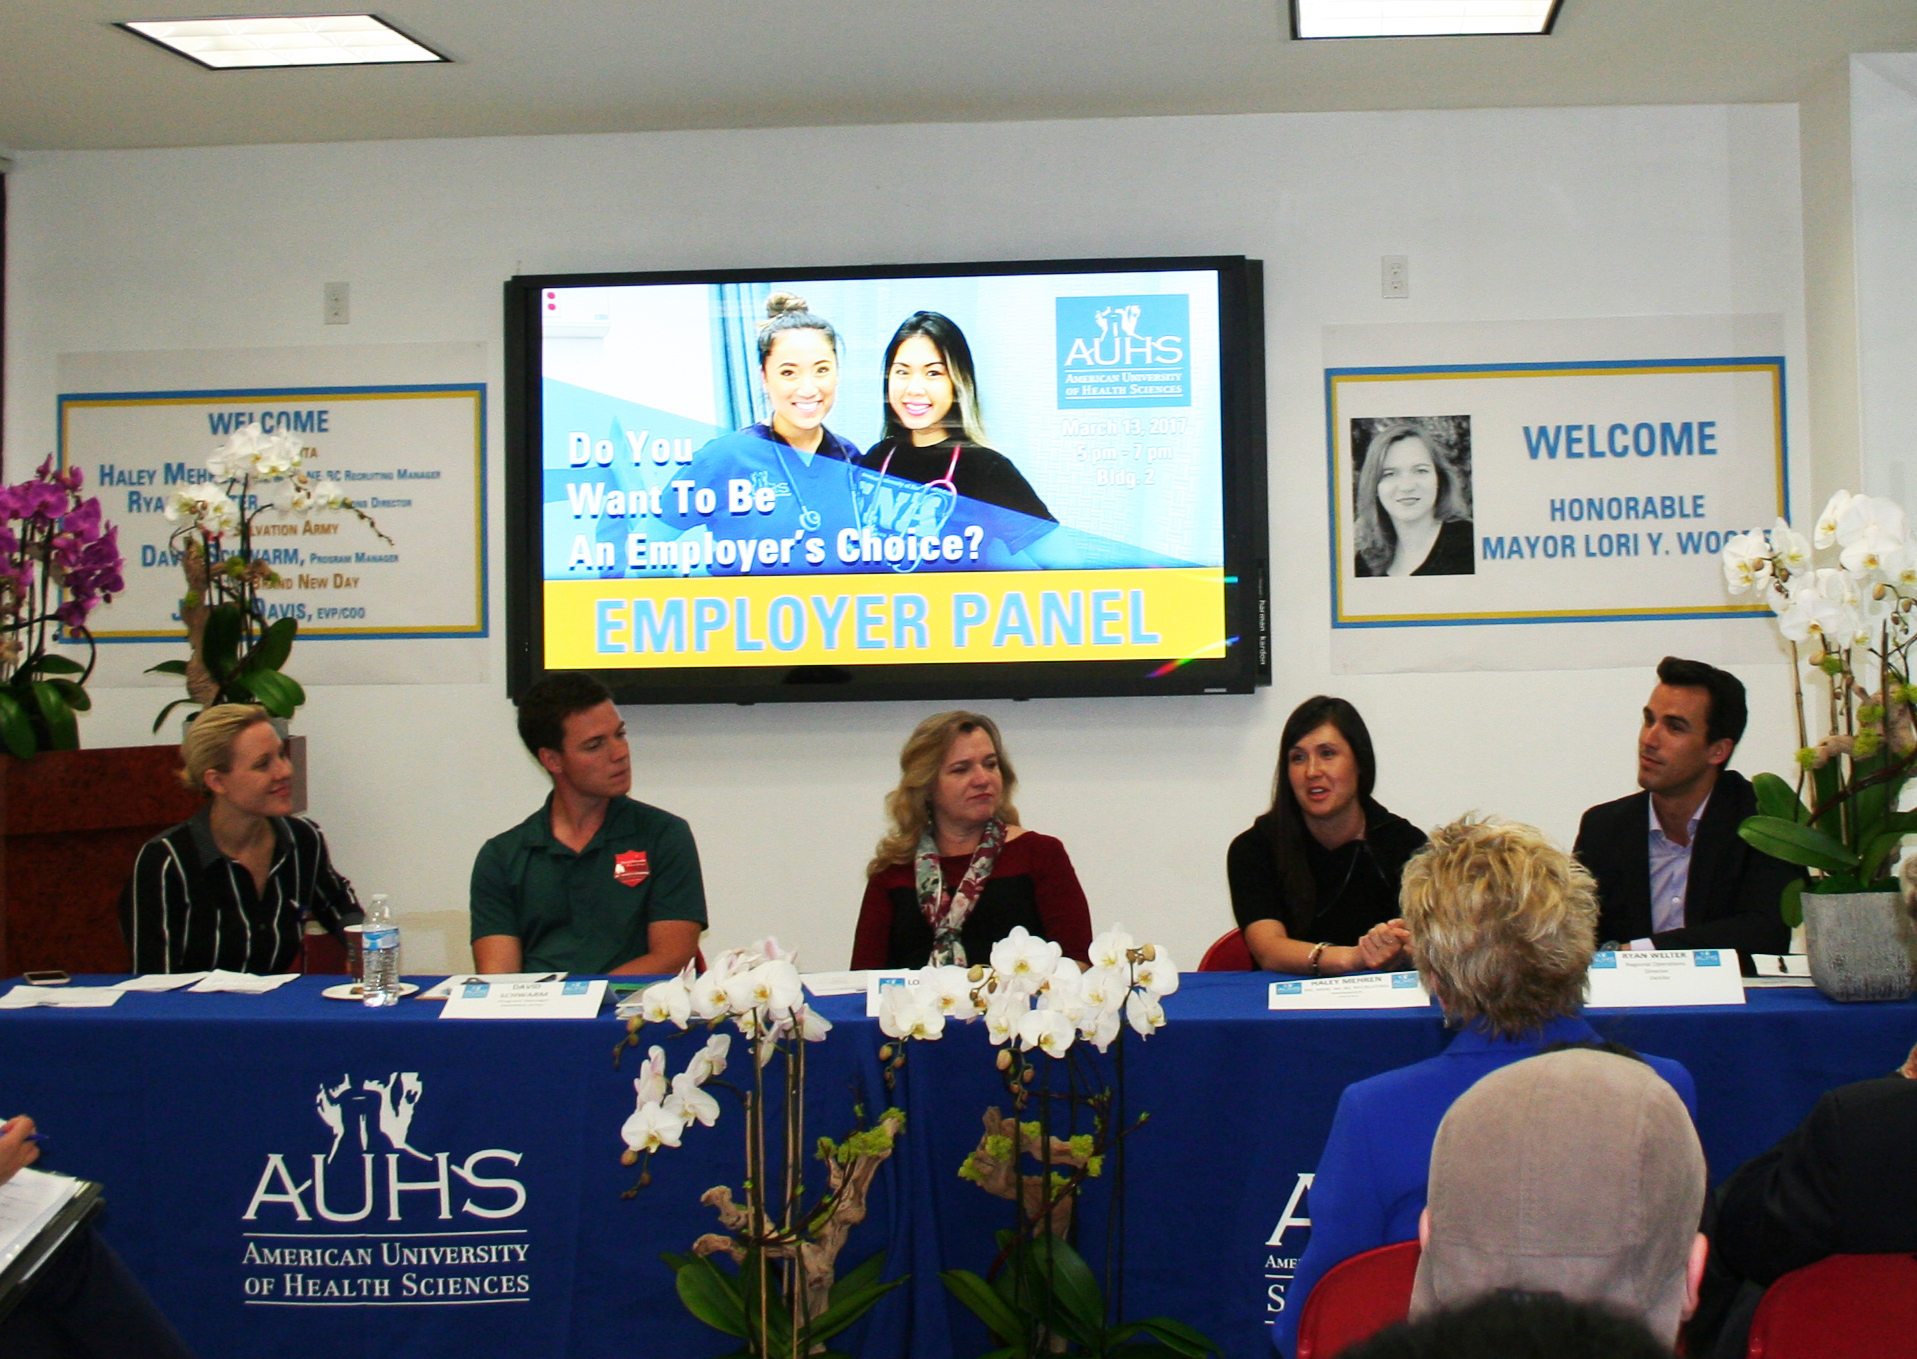 AUHS Students Receives Valuable Career Advice at Employer Panel